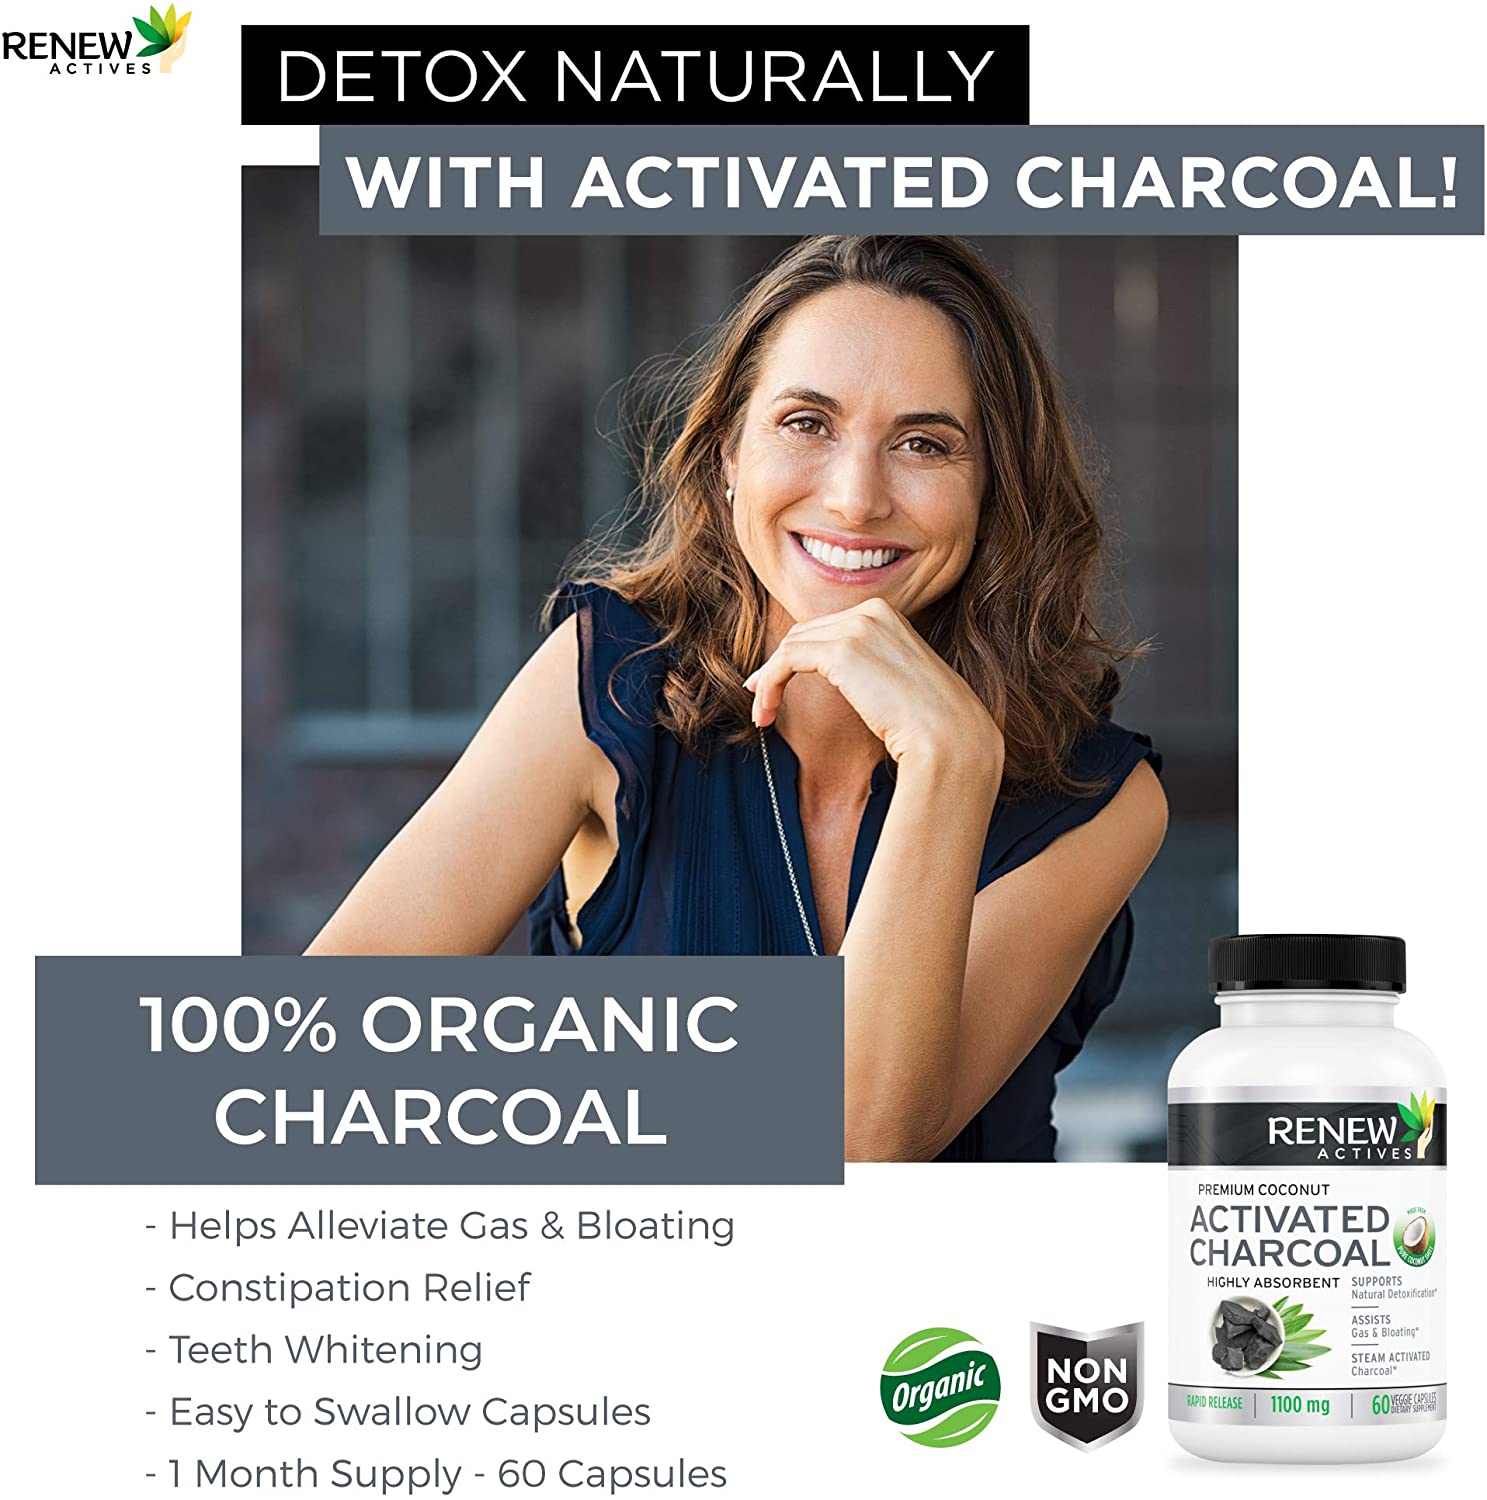 Renew Actives Activated Charcoal Capsules - 60 ct. for Digestive Support & Teeth Whitening